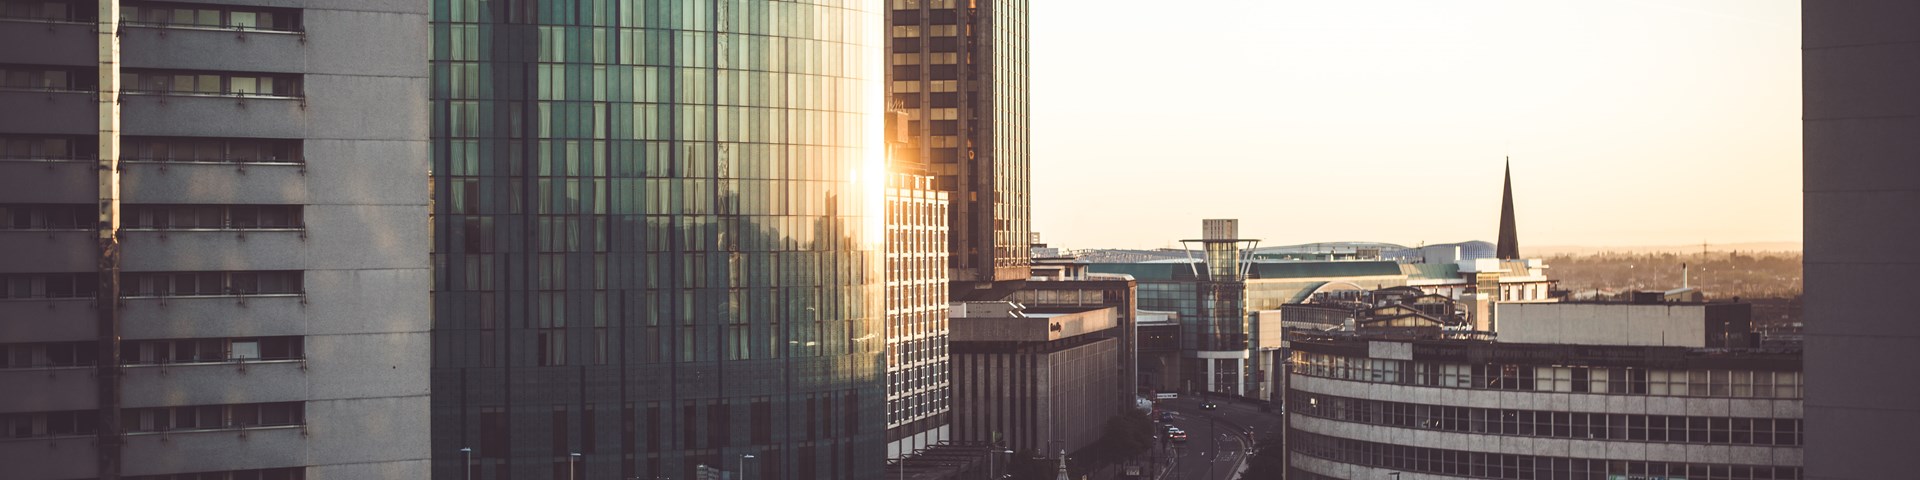 Image of birmingham as the sun is setting showing skyscrapers